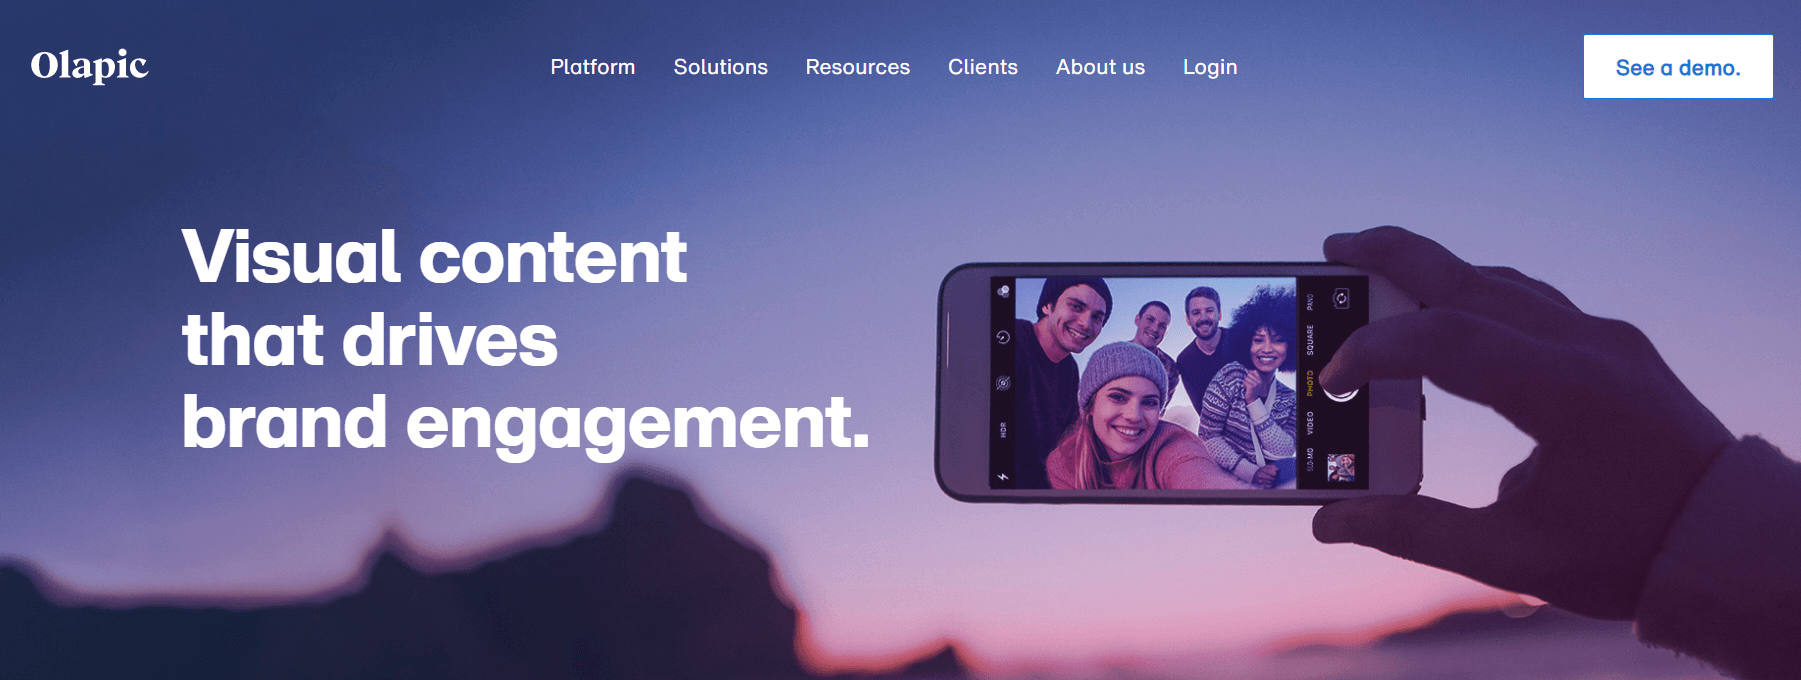 Olapic homepage: Visual content that drives brand engagement